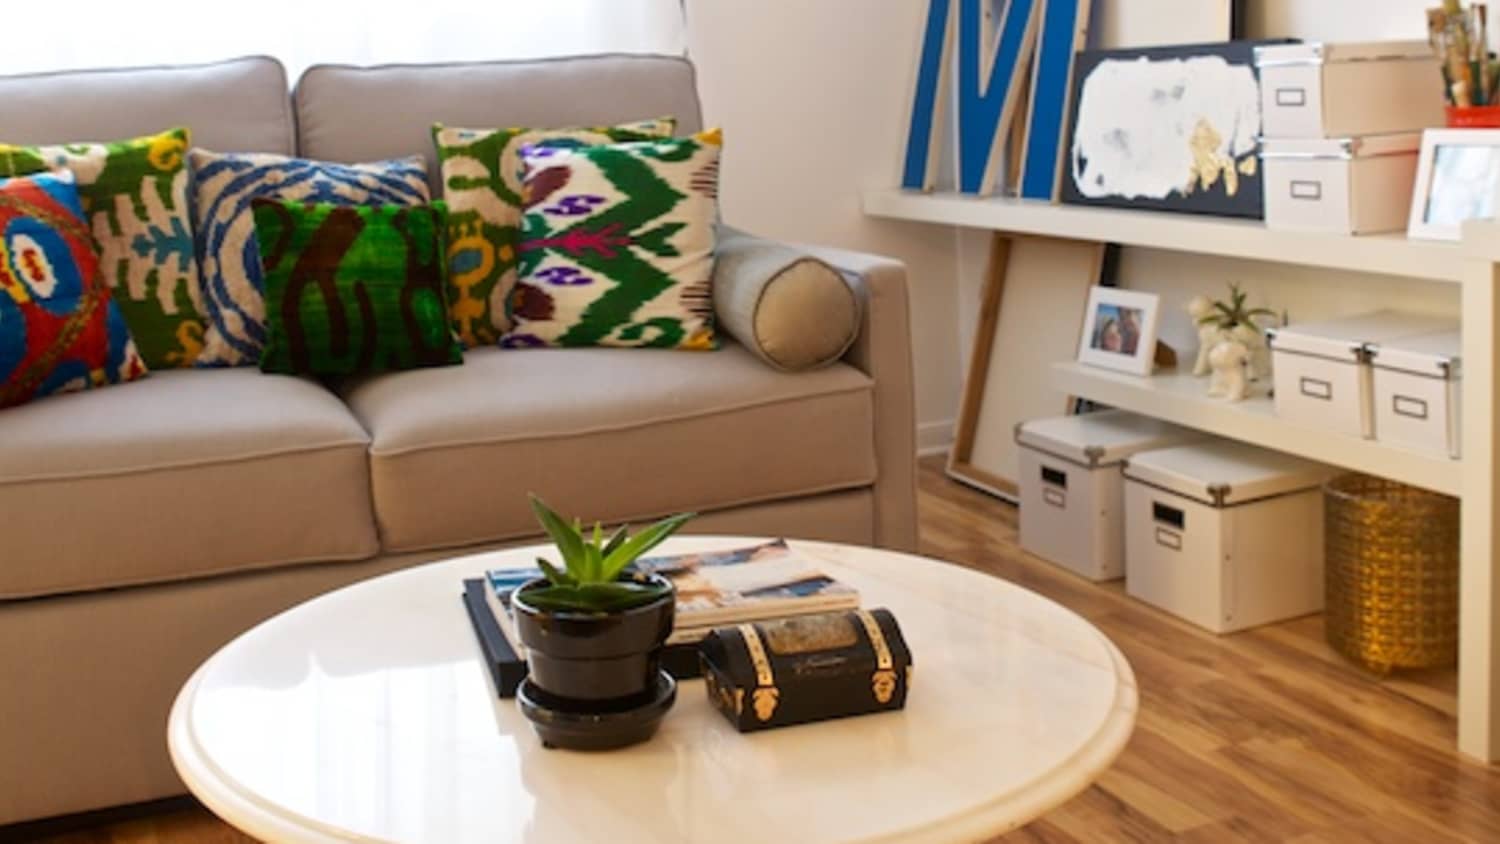 How to Make the Most Out of Your Small Space, According to Experts